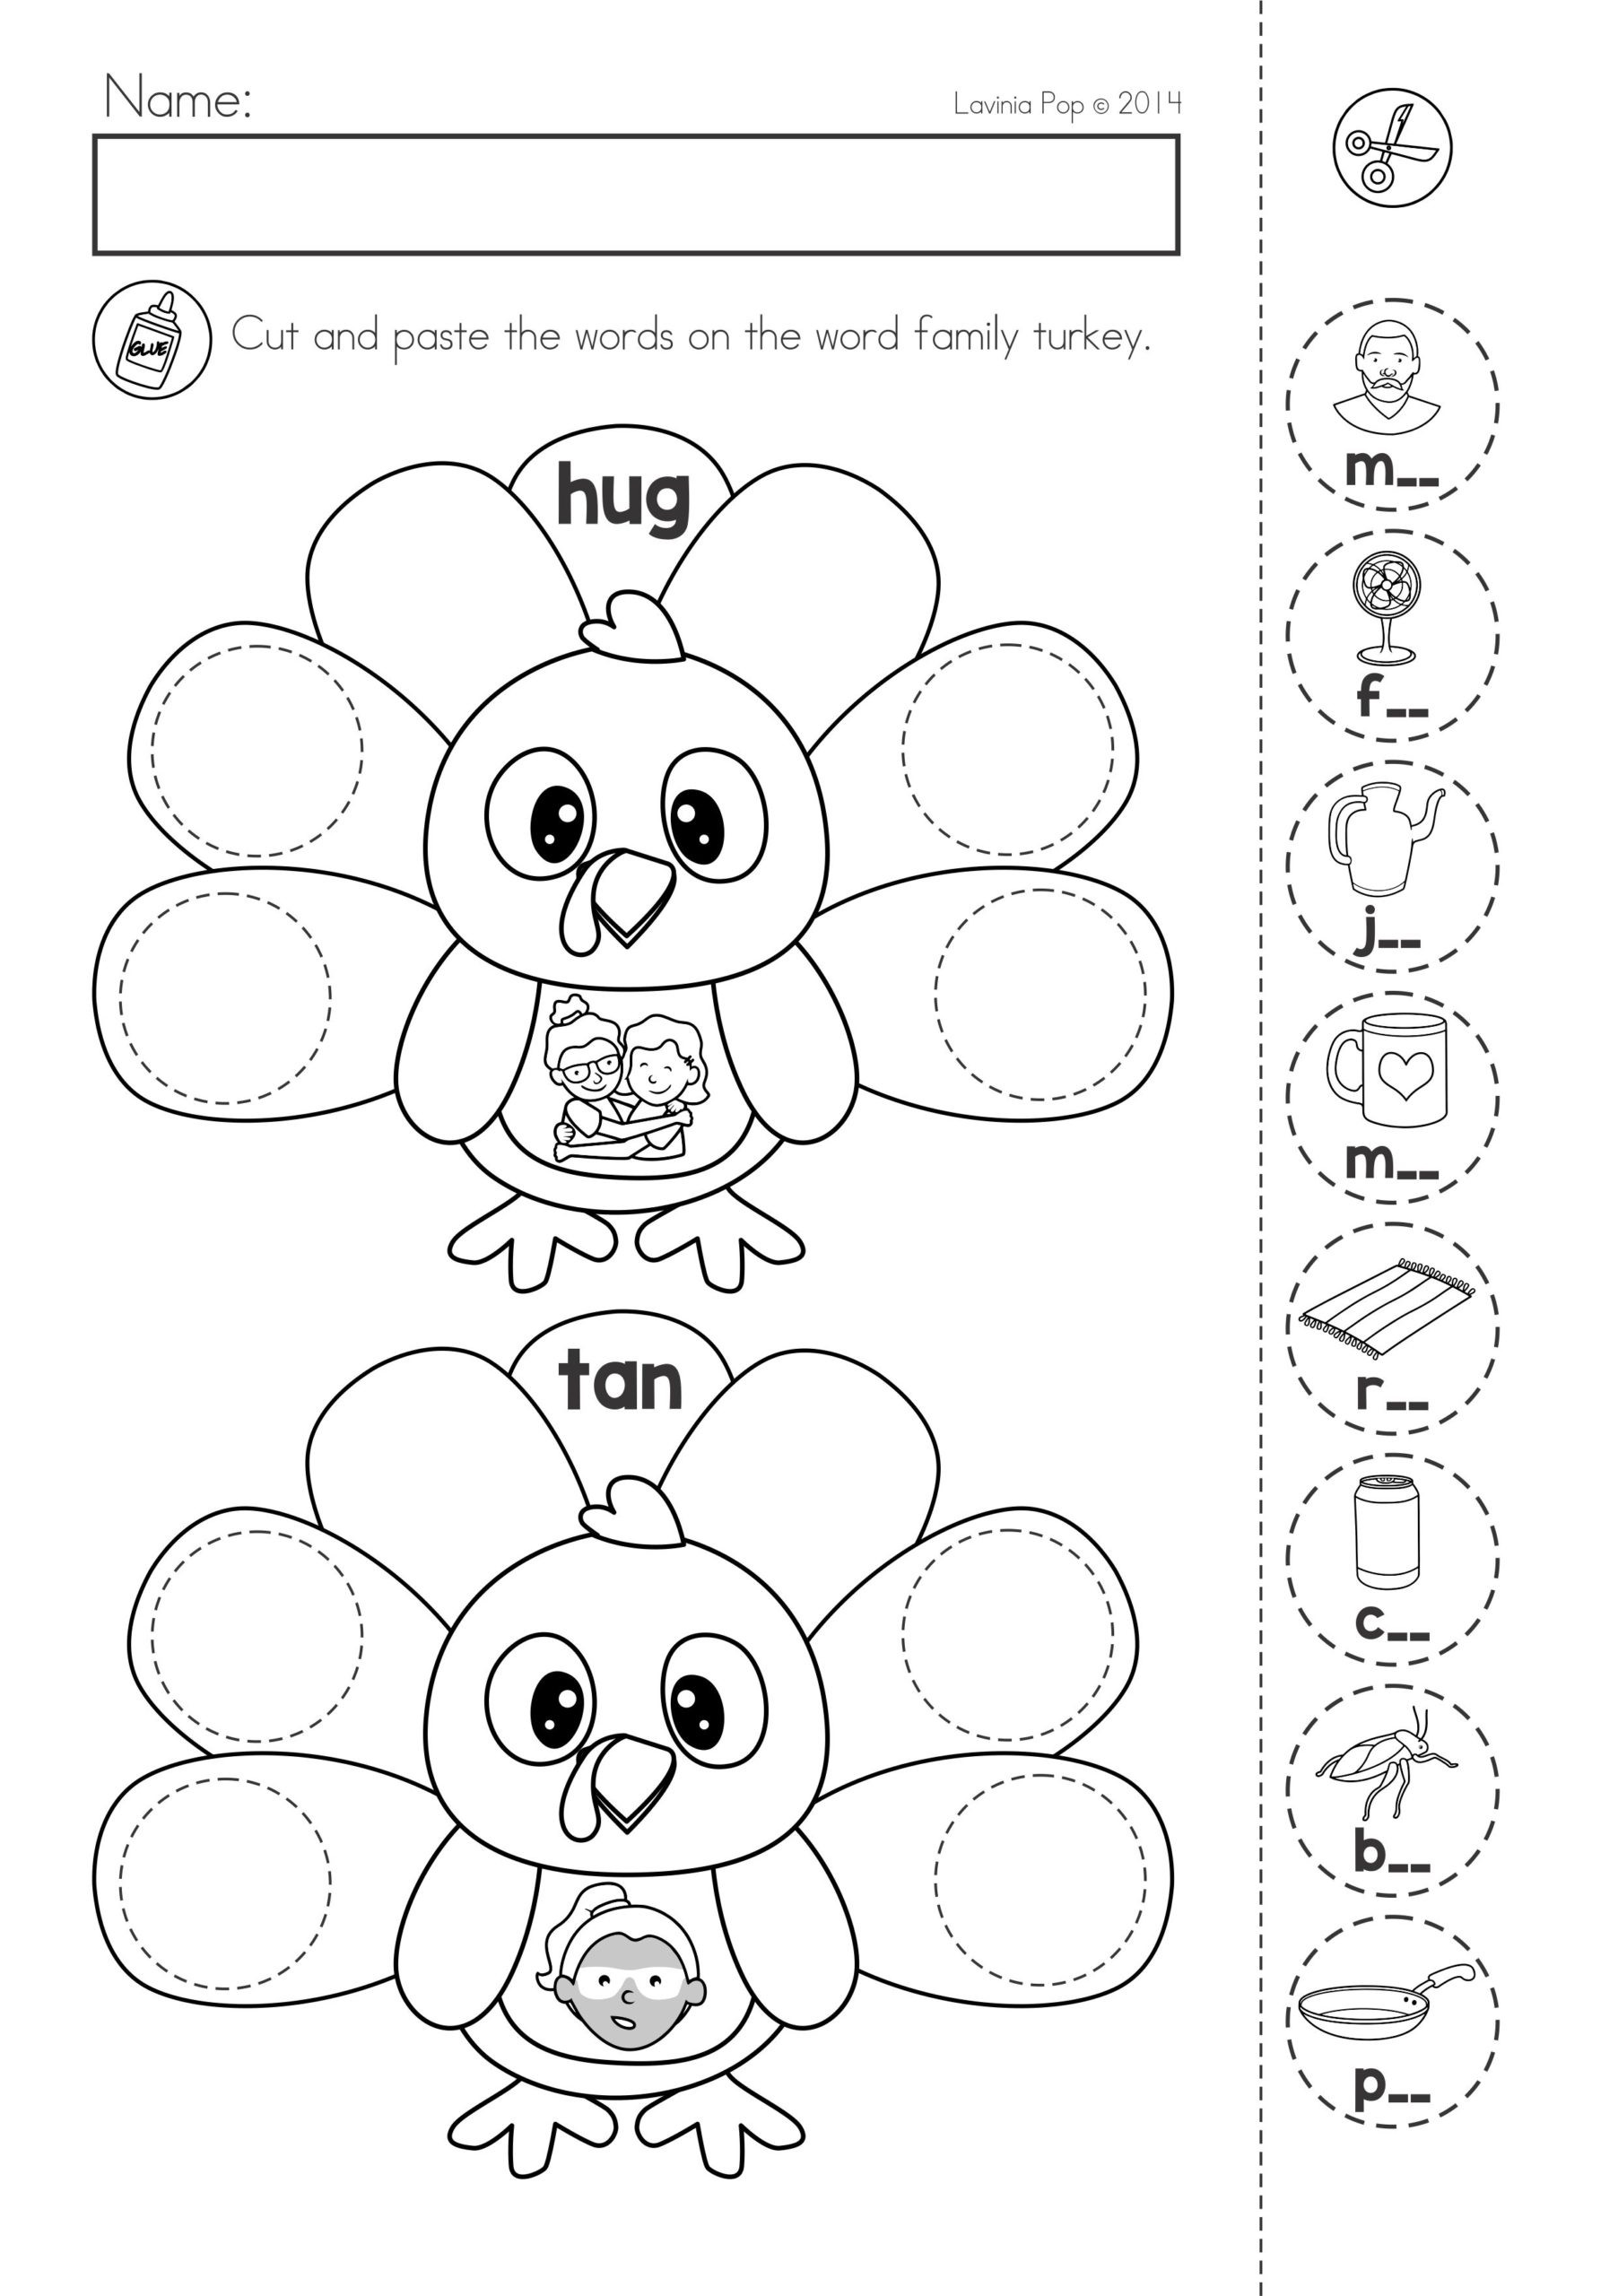 children school worksheets mathematics kids worksheet problems free letter for subtraction word year advanced first grade graduation party find activities emotions printable good scaled